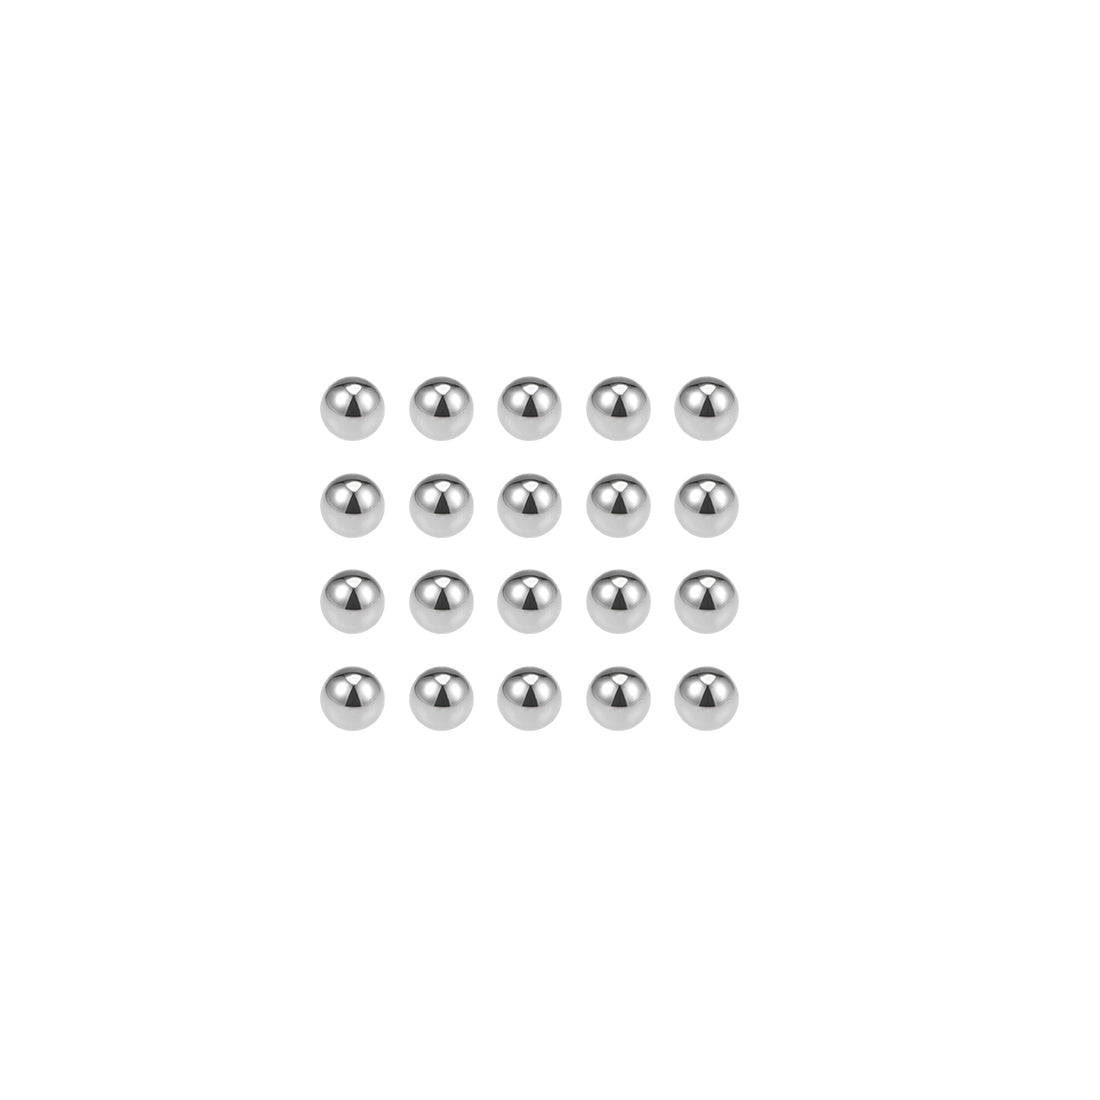 uxcell Uxcell Precision Balls 1.5mm Solid Chrome Steel G10 for Ball Bearing Wheel 100pcs